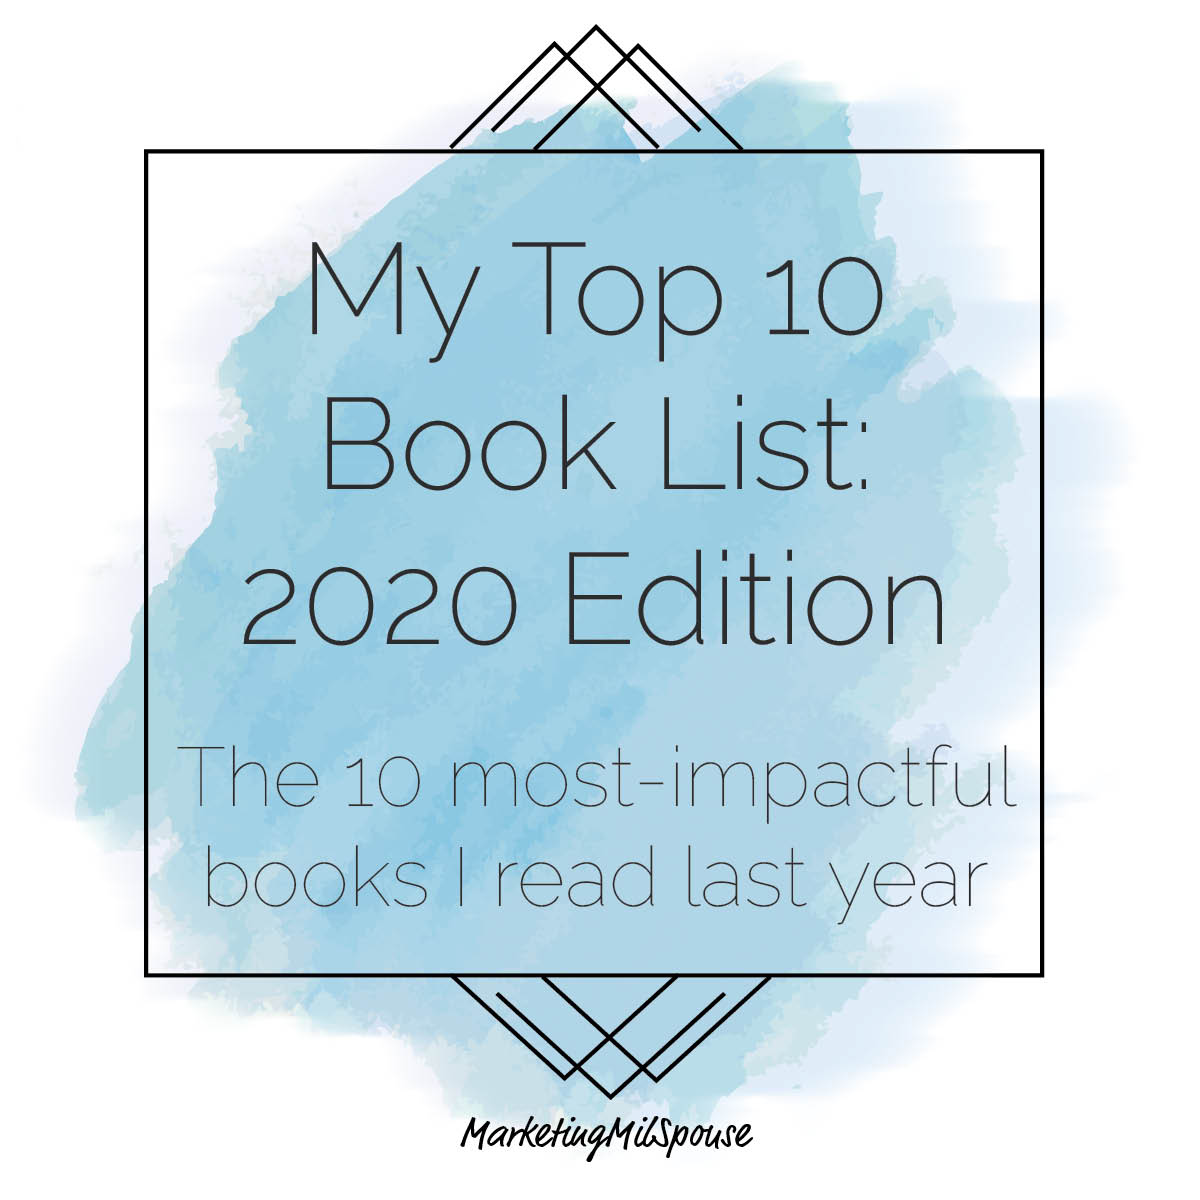 My Top 10 Book List, 2020 Edition